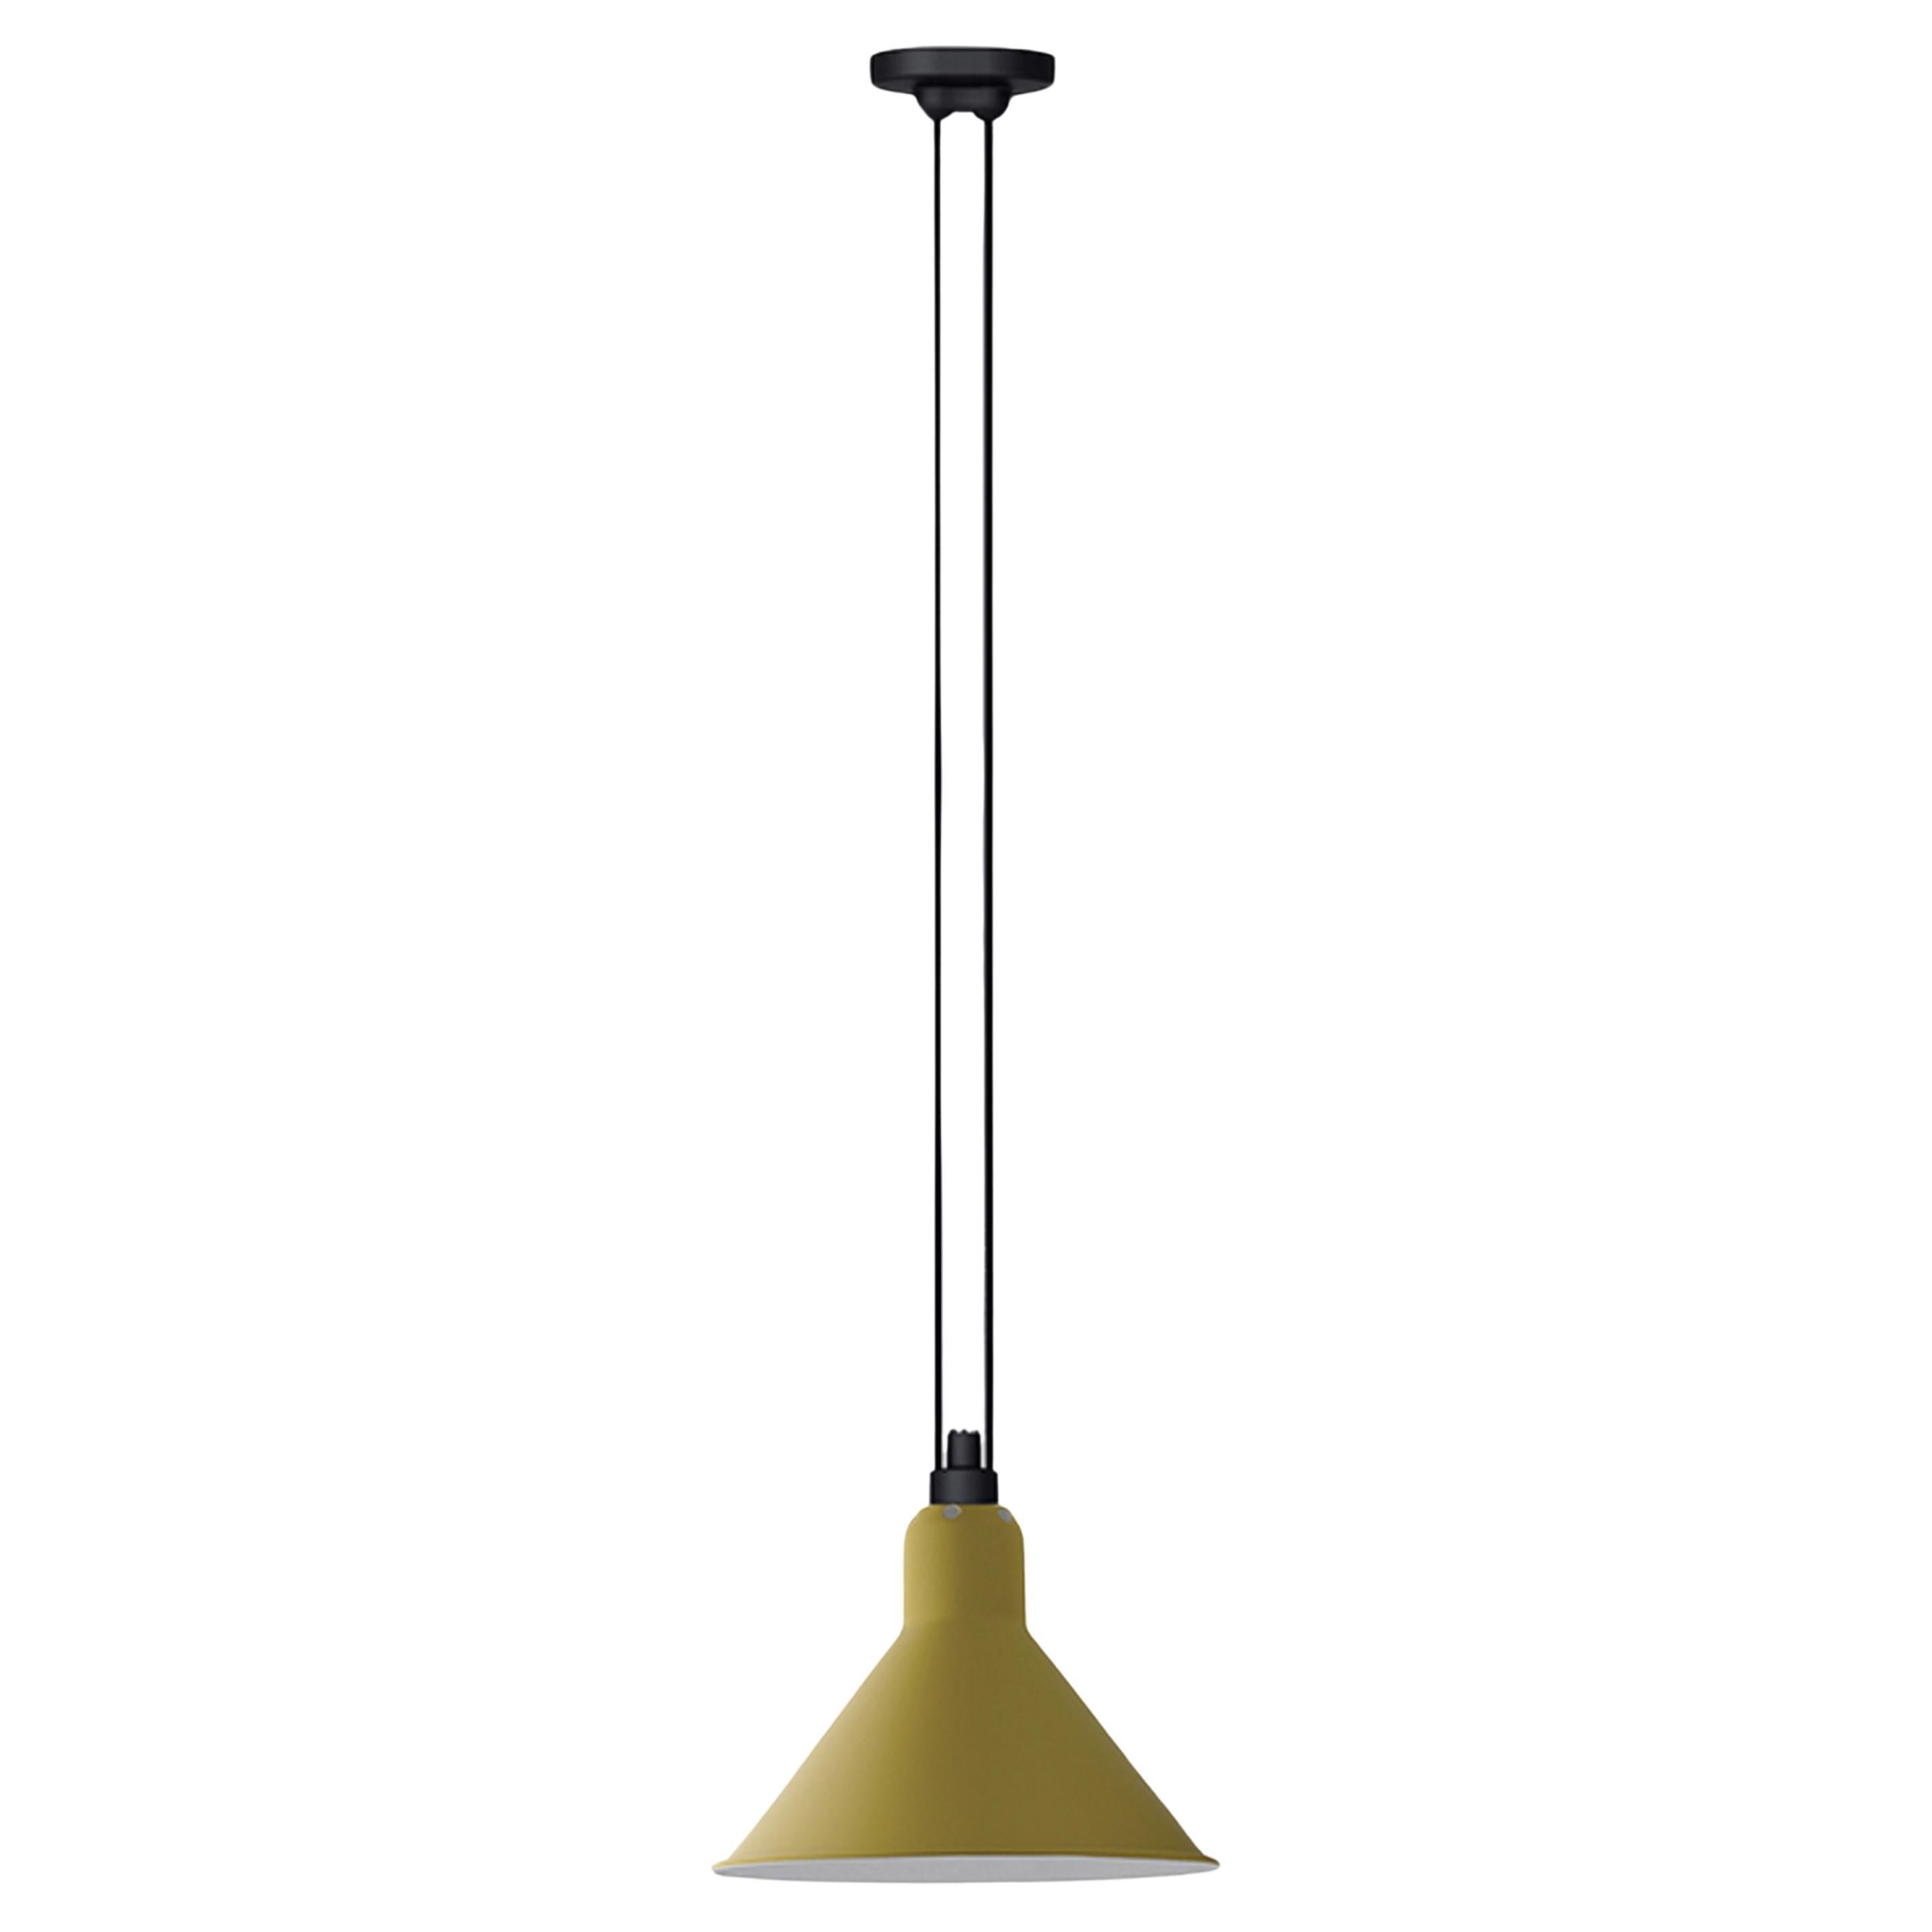 DCW Editions Les Acrobates N°322 Large Conic Pendant Lamp in Yellow Shade For Sale